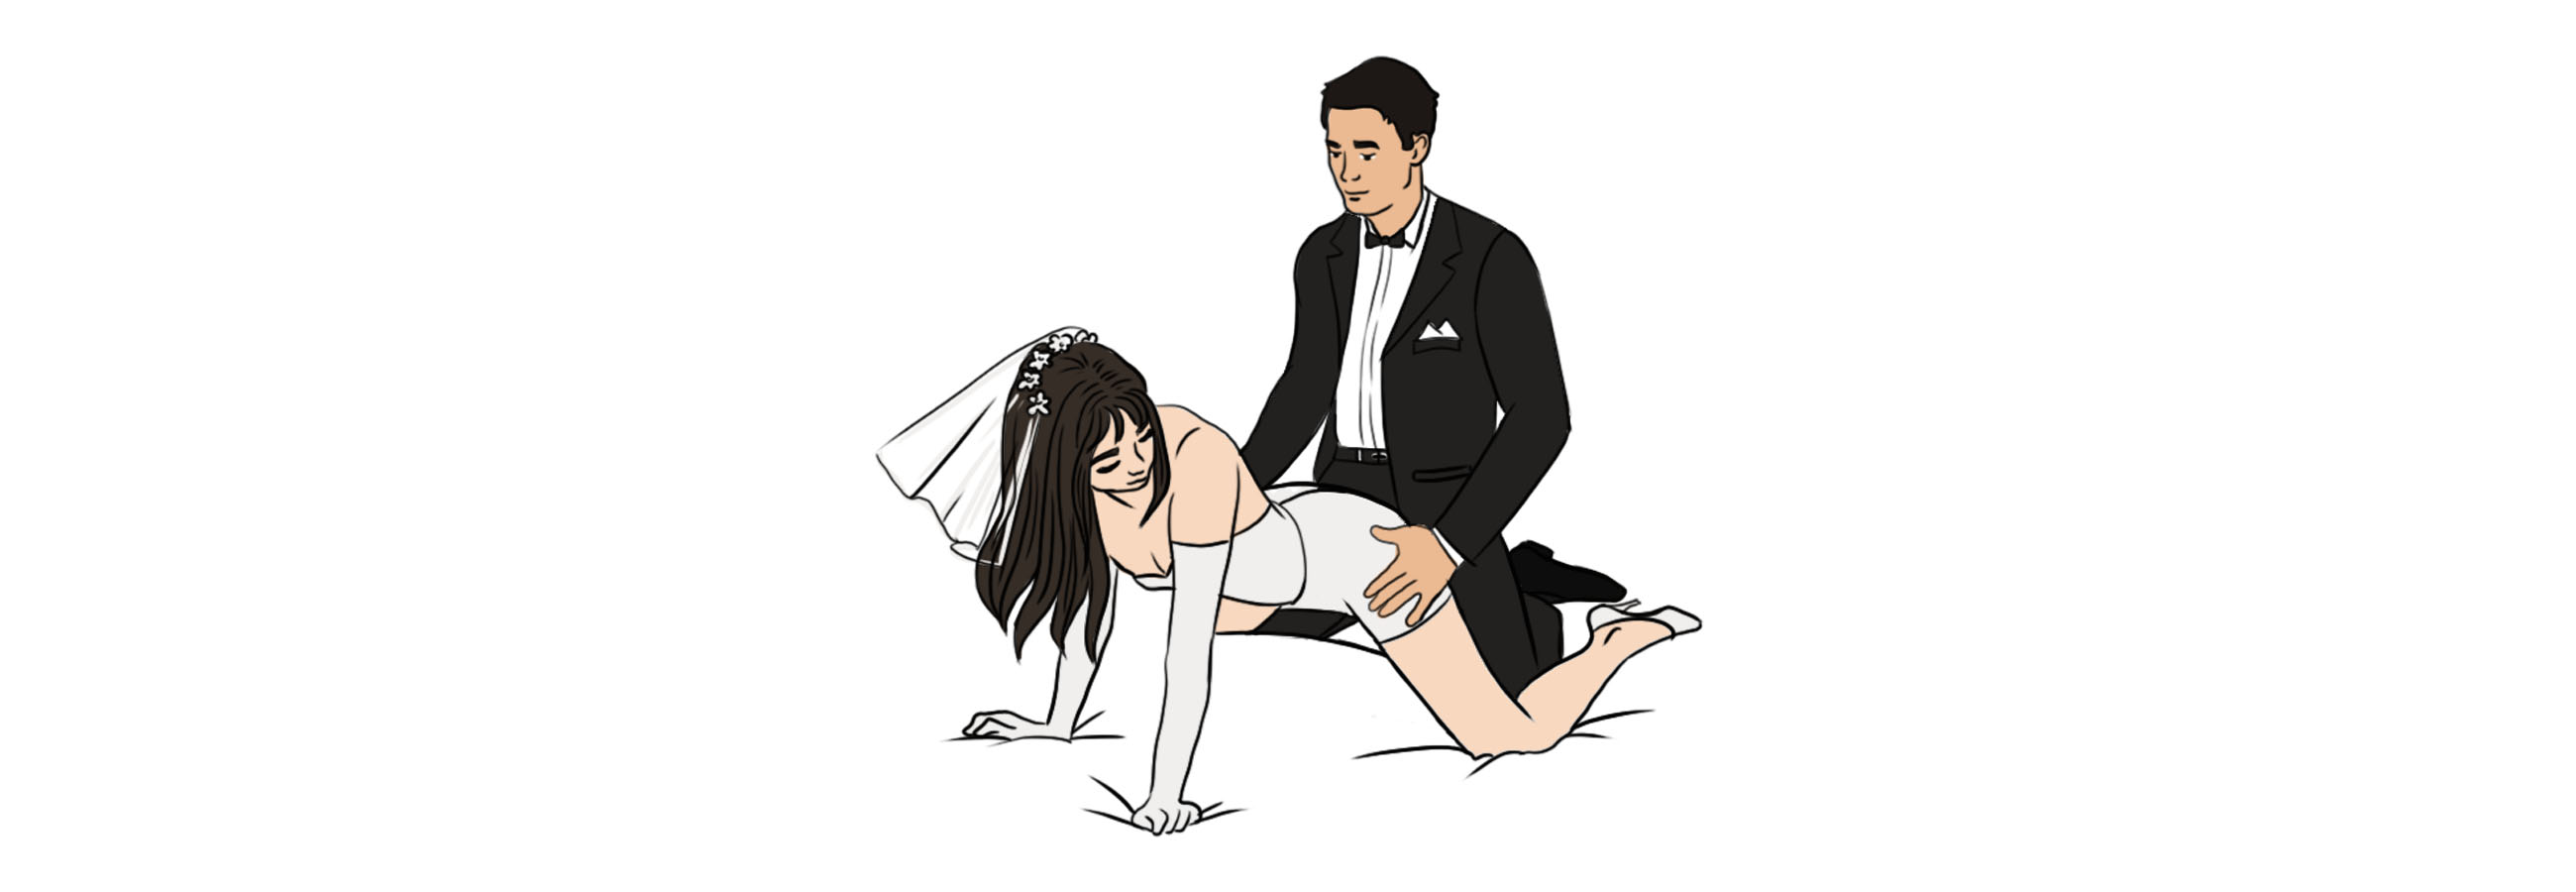 couple married position sexual